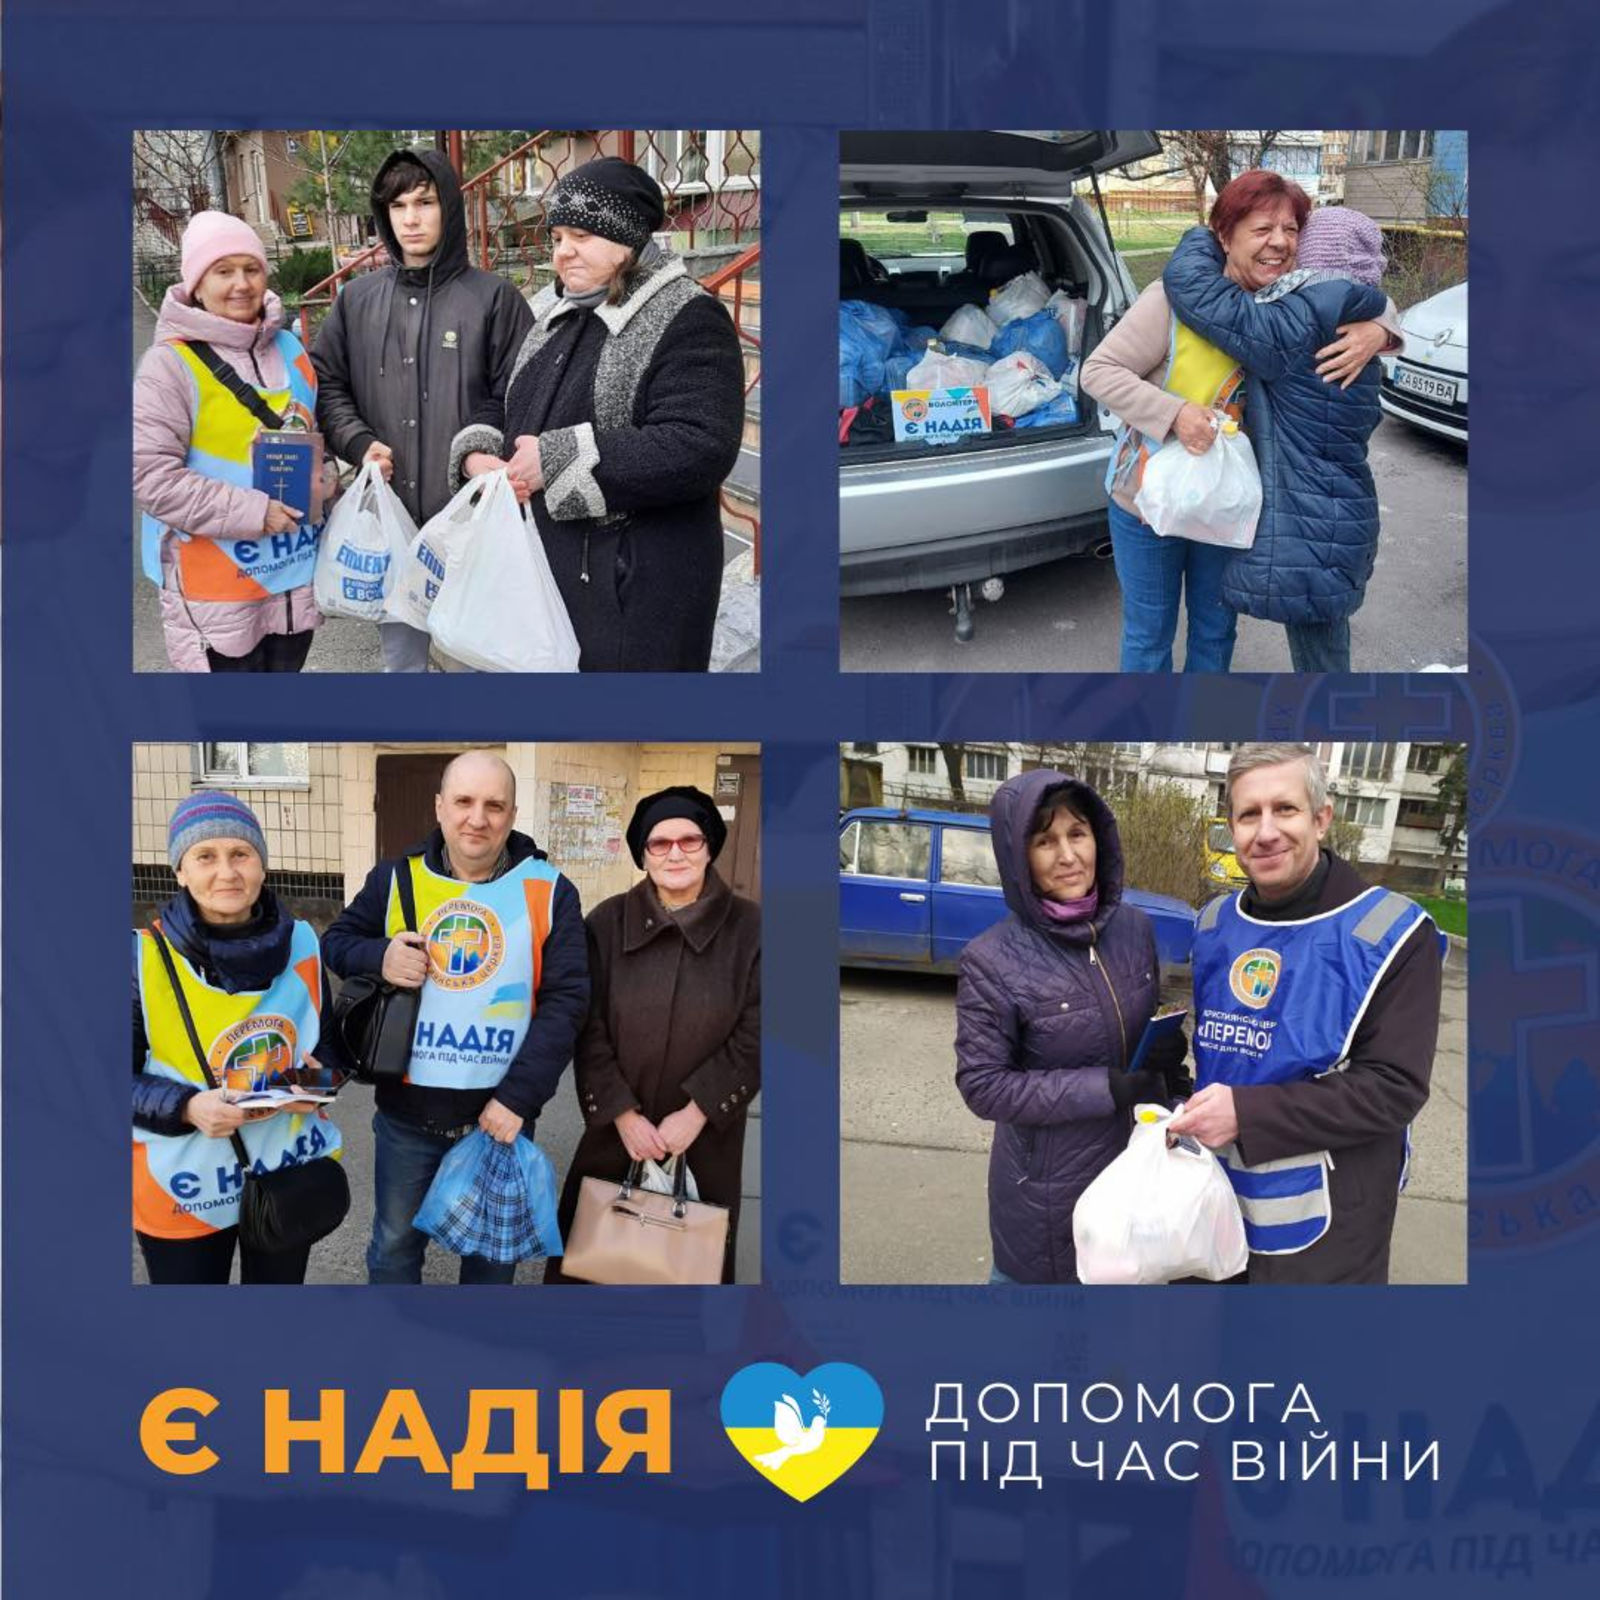 THERE IS HOPE - help during wartime" project by Victory Christian Church in Kyiv and Kyiv oblast.